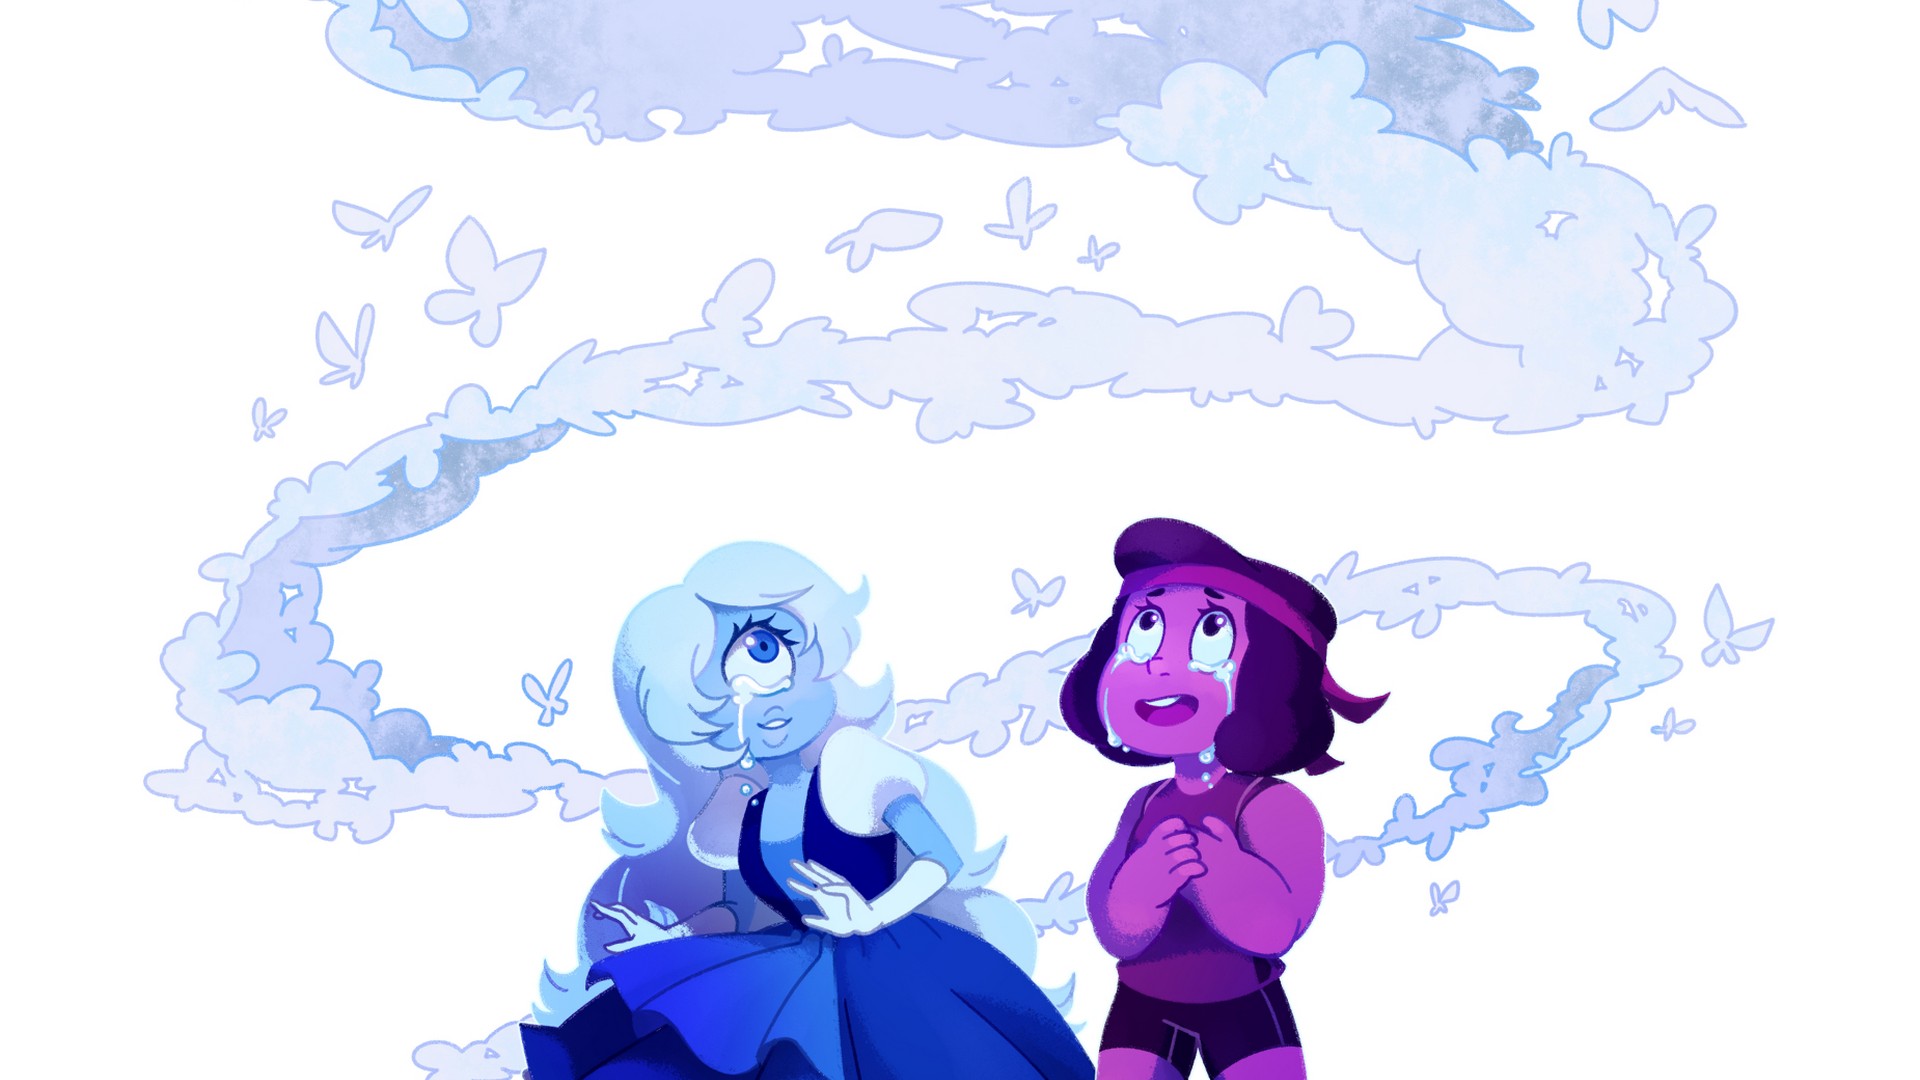 Wallpaper HD Steven Universe The Movie with high-resolution 1920x1080 pixel. You can use this wallpaper for your Desktop Computer Backgrounds, Mac Wallpapers, Android Lock screen or iPhone Screensavers and another smartphone device